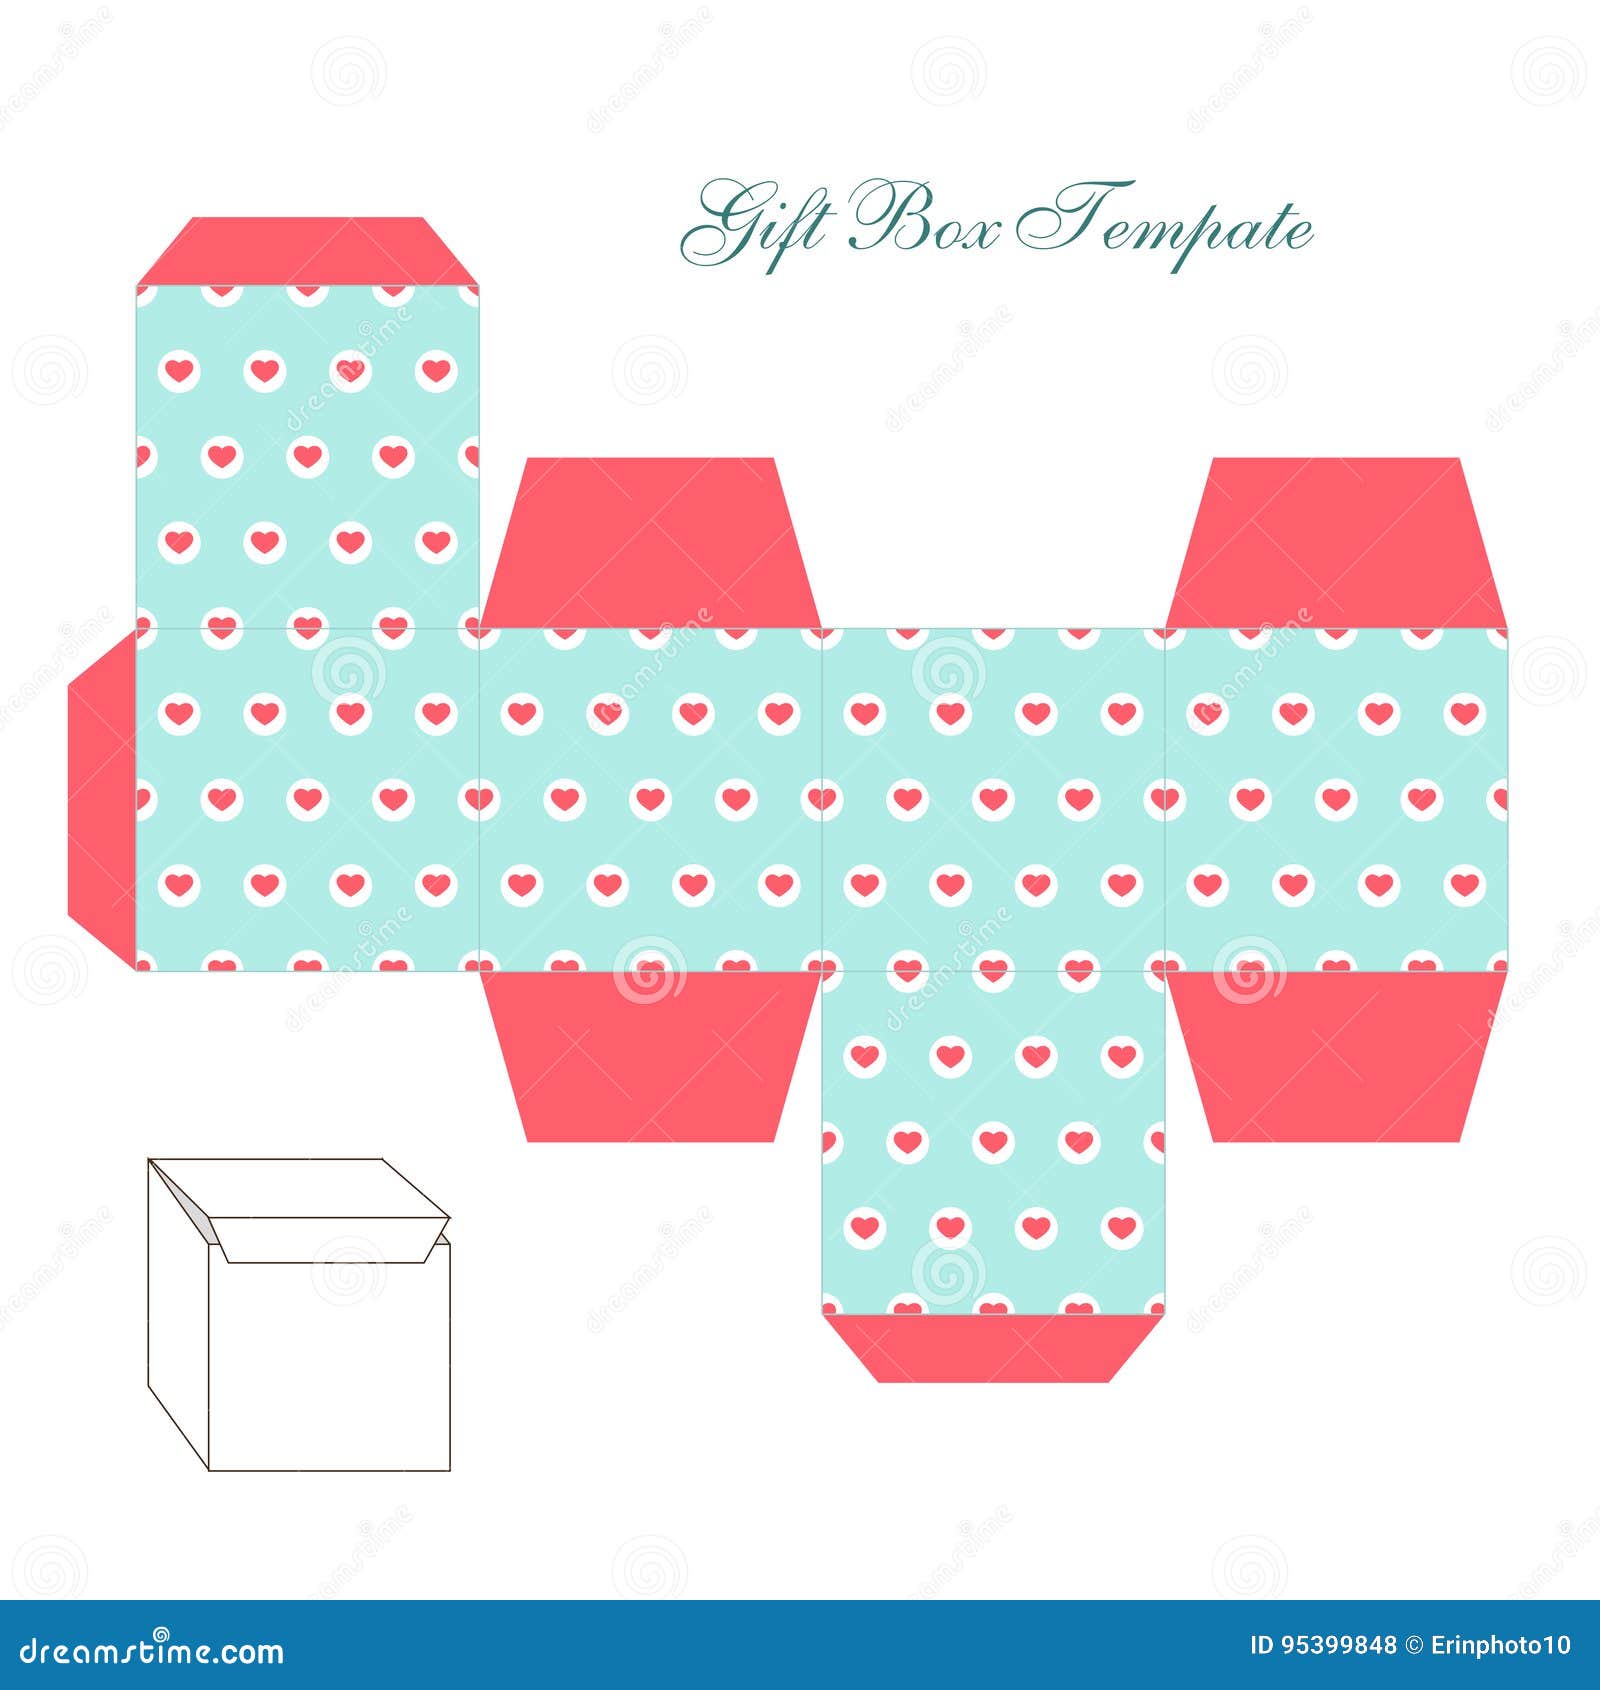 Cute Retro Square Gift Box Template With Shabby Chic Ornament To Print Cut  And Fold Stock Illustration - Download Image Now - iStock